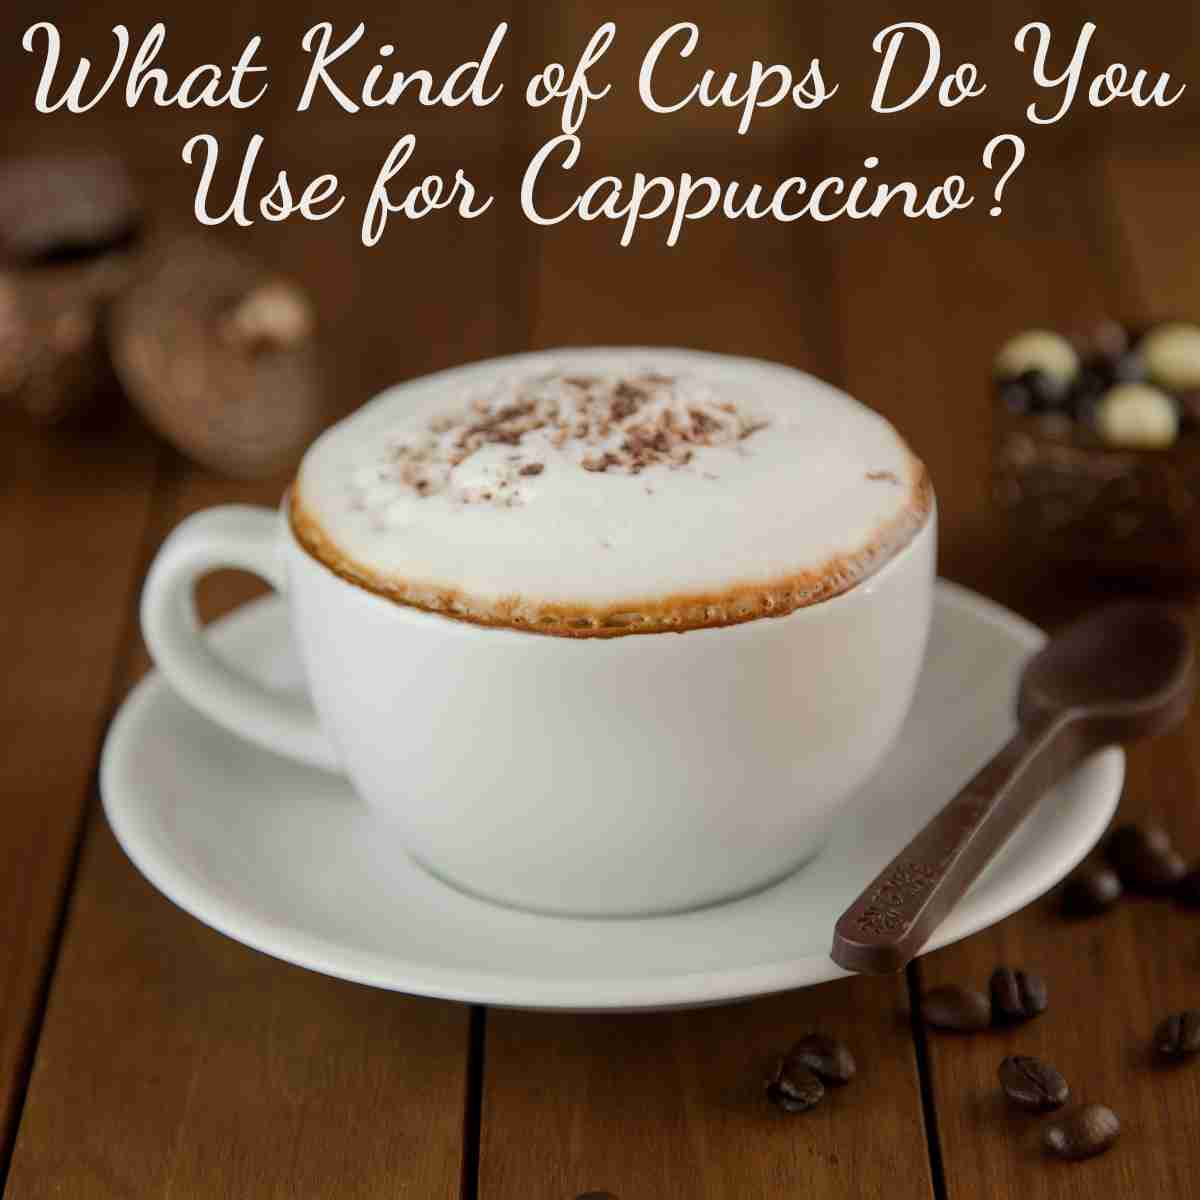 What Kind of Cups Do You Use for Cappuccino?